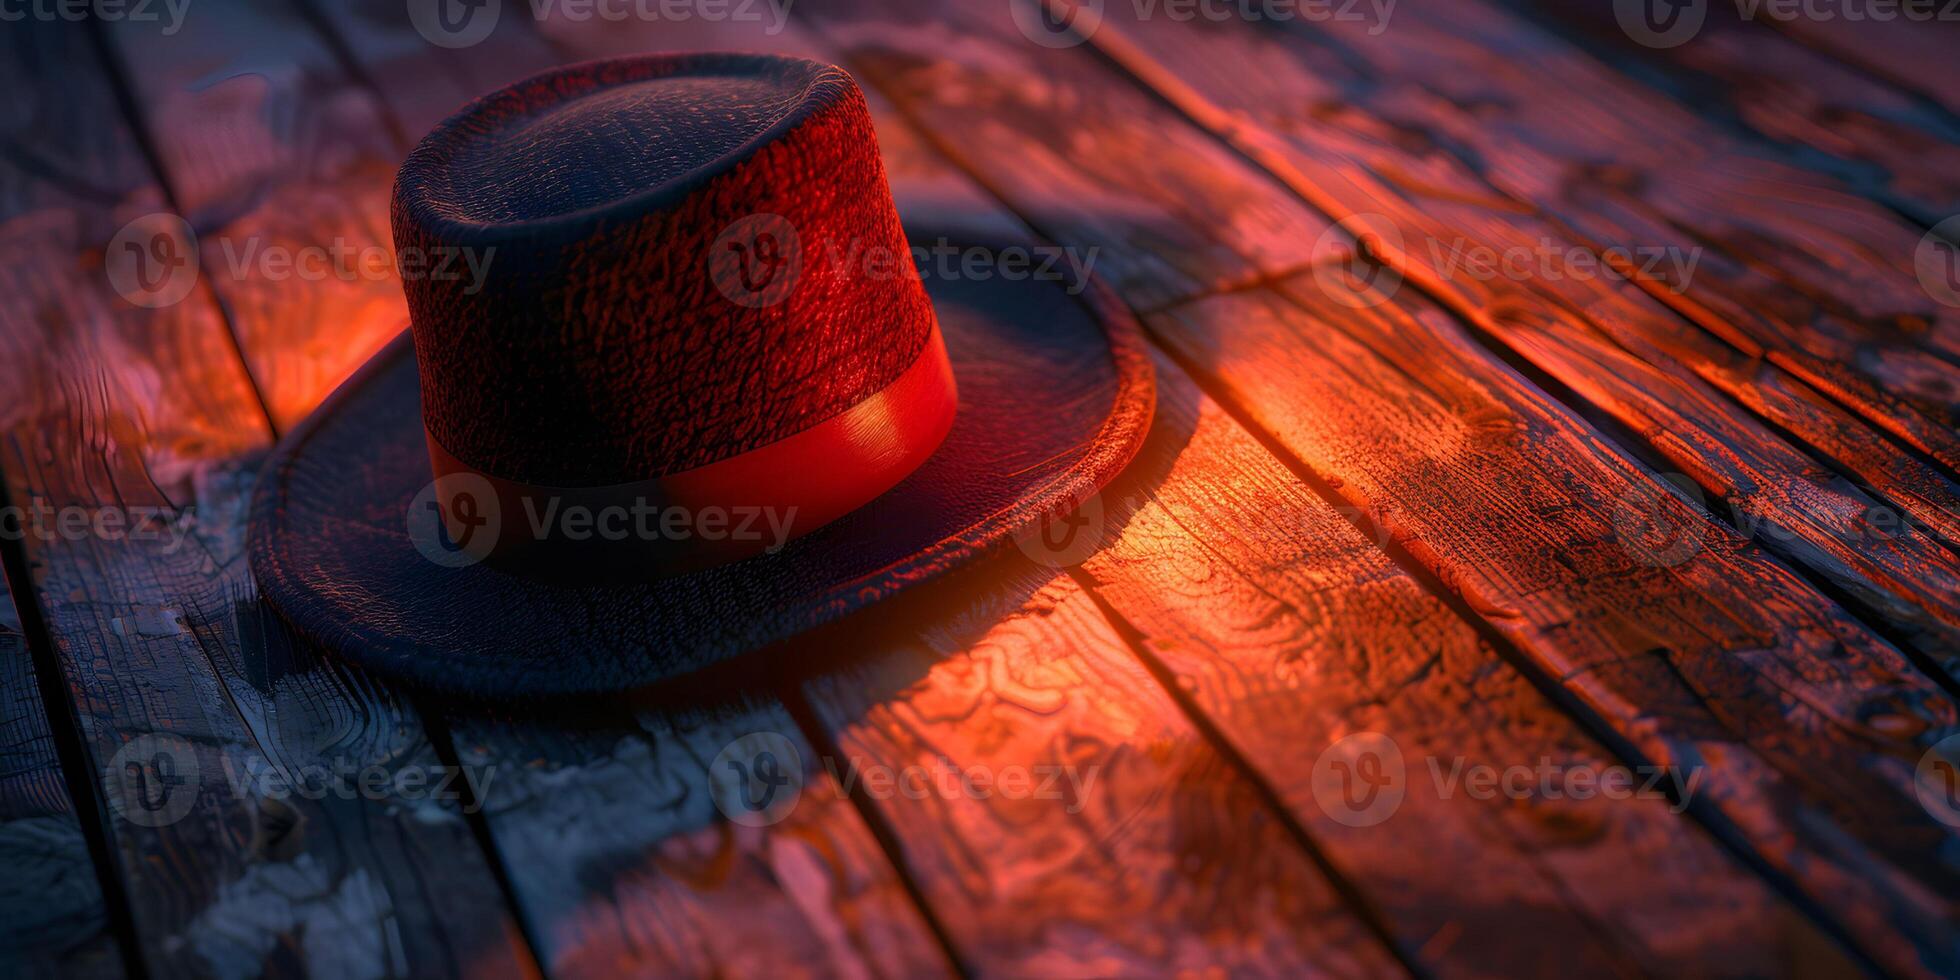 AI Generated mystery hat in wooden background photo